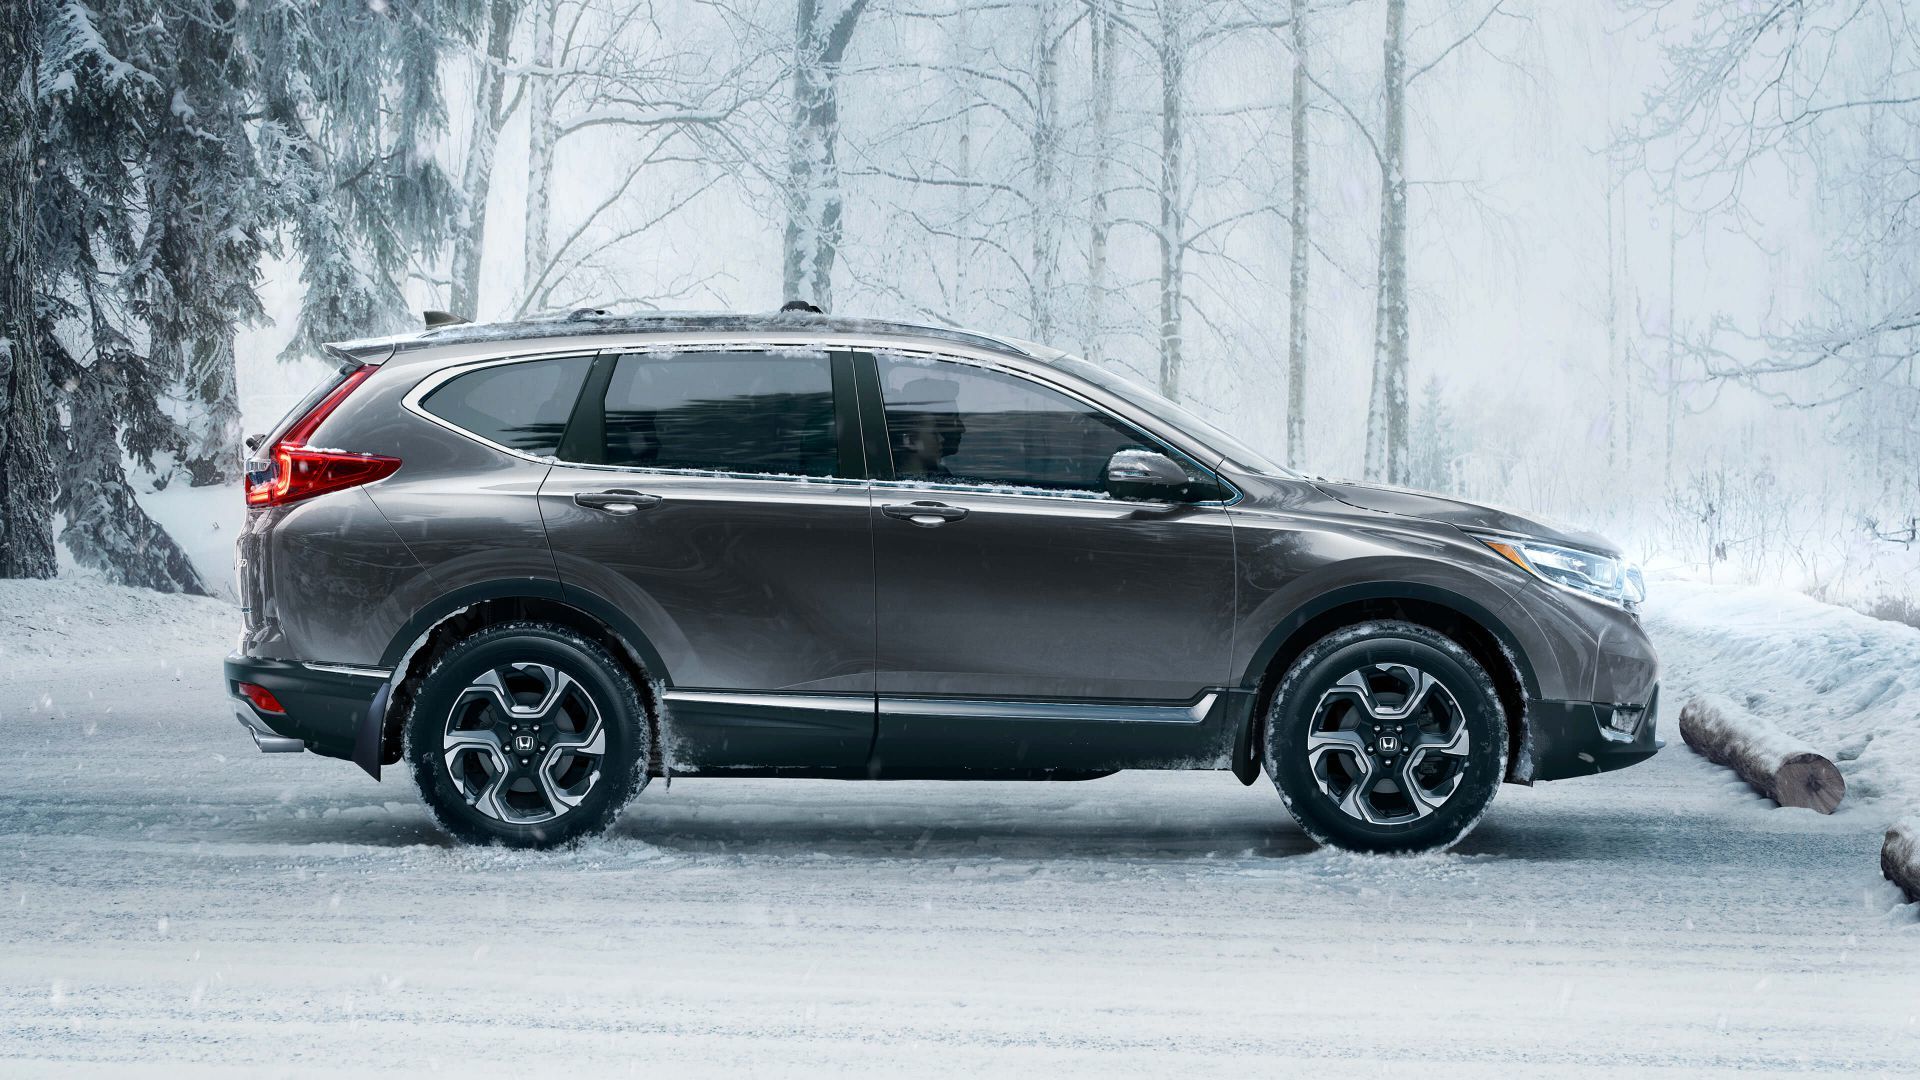 2018 Honda CR-V in a forest during the winter season